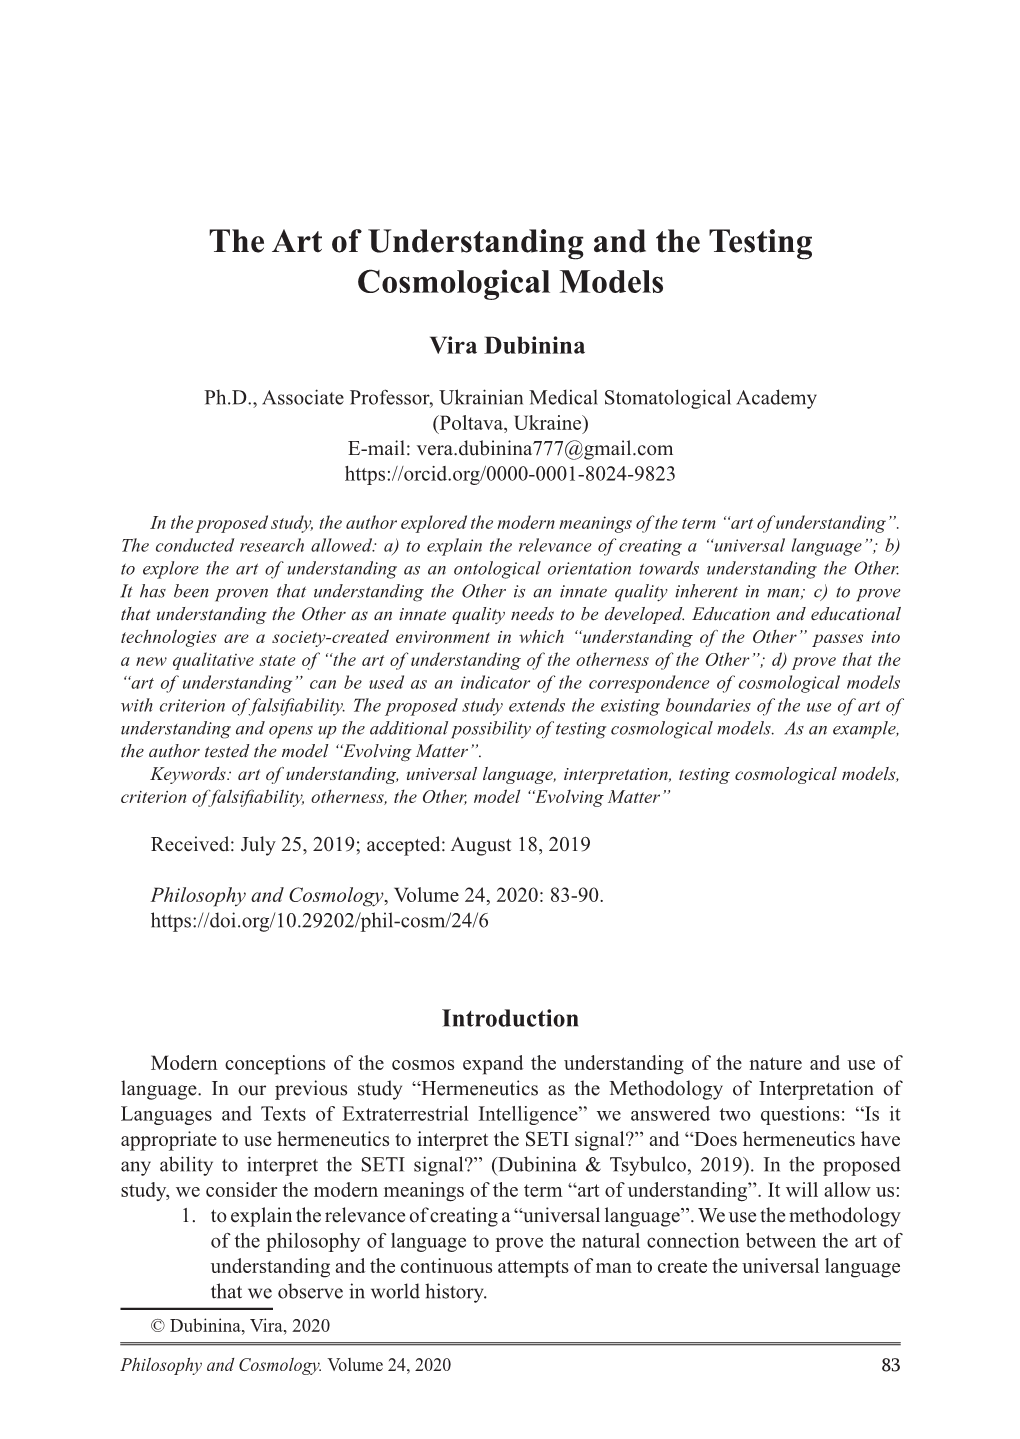 The Art of Understanding and the Testing Cosmological Models